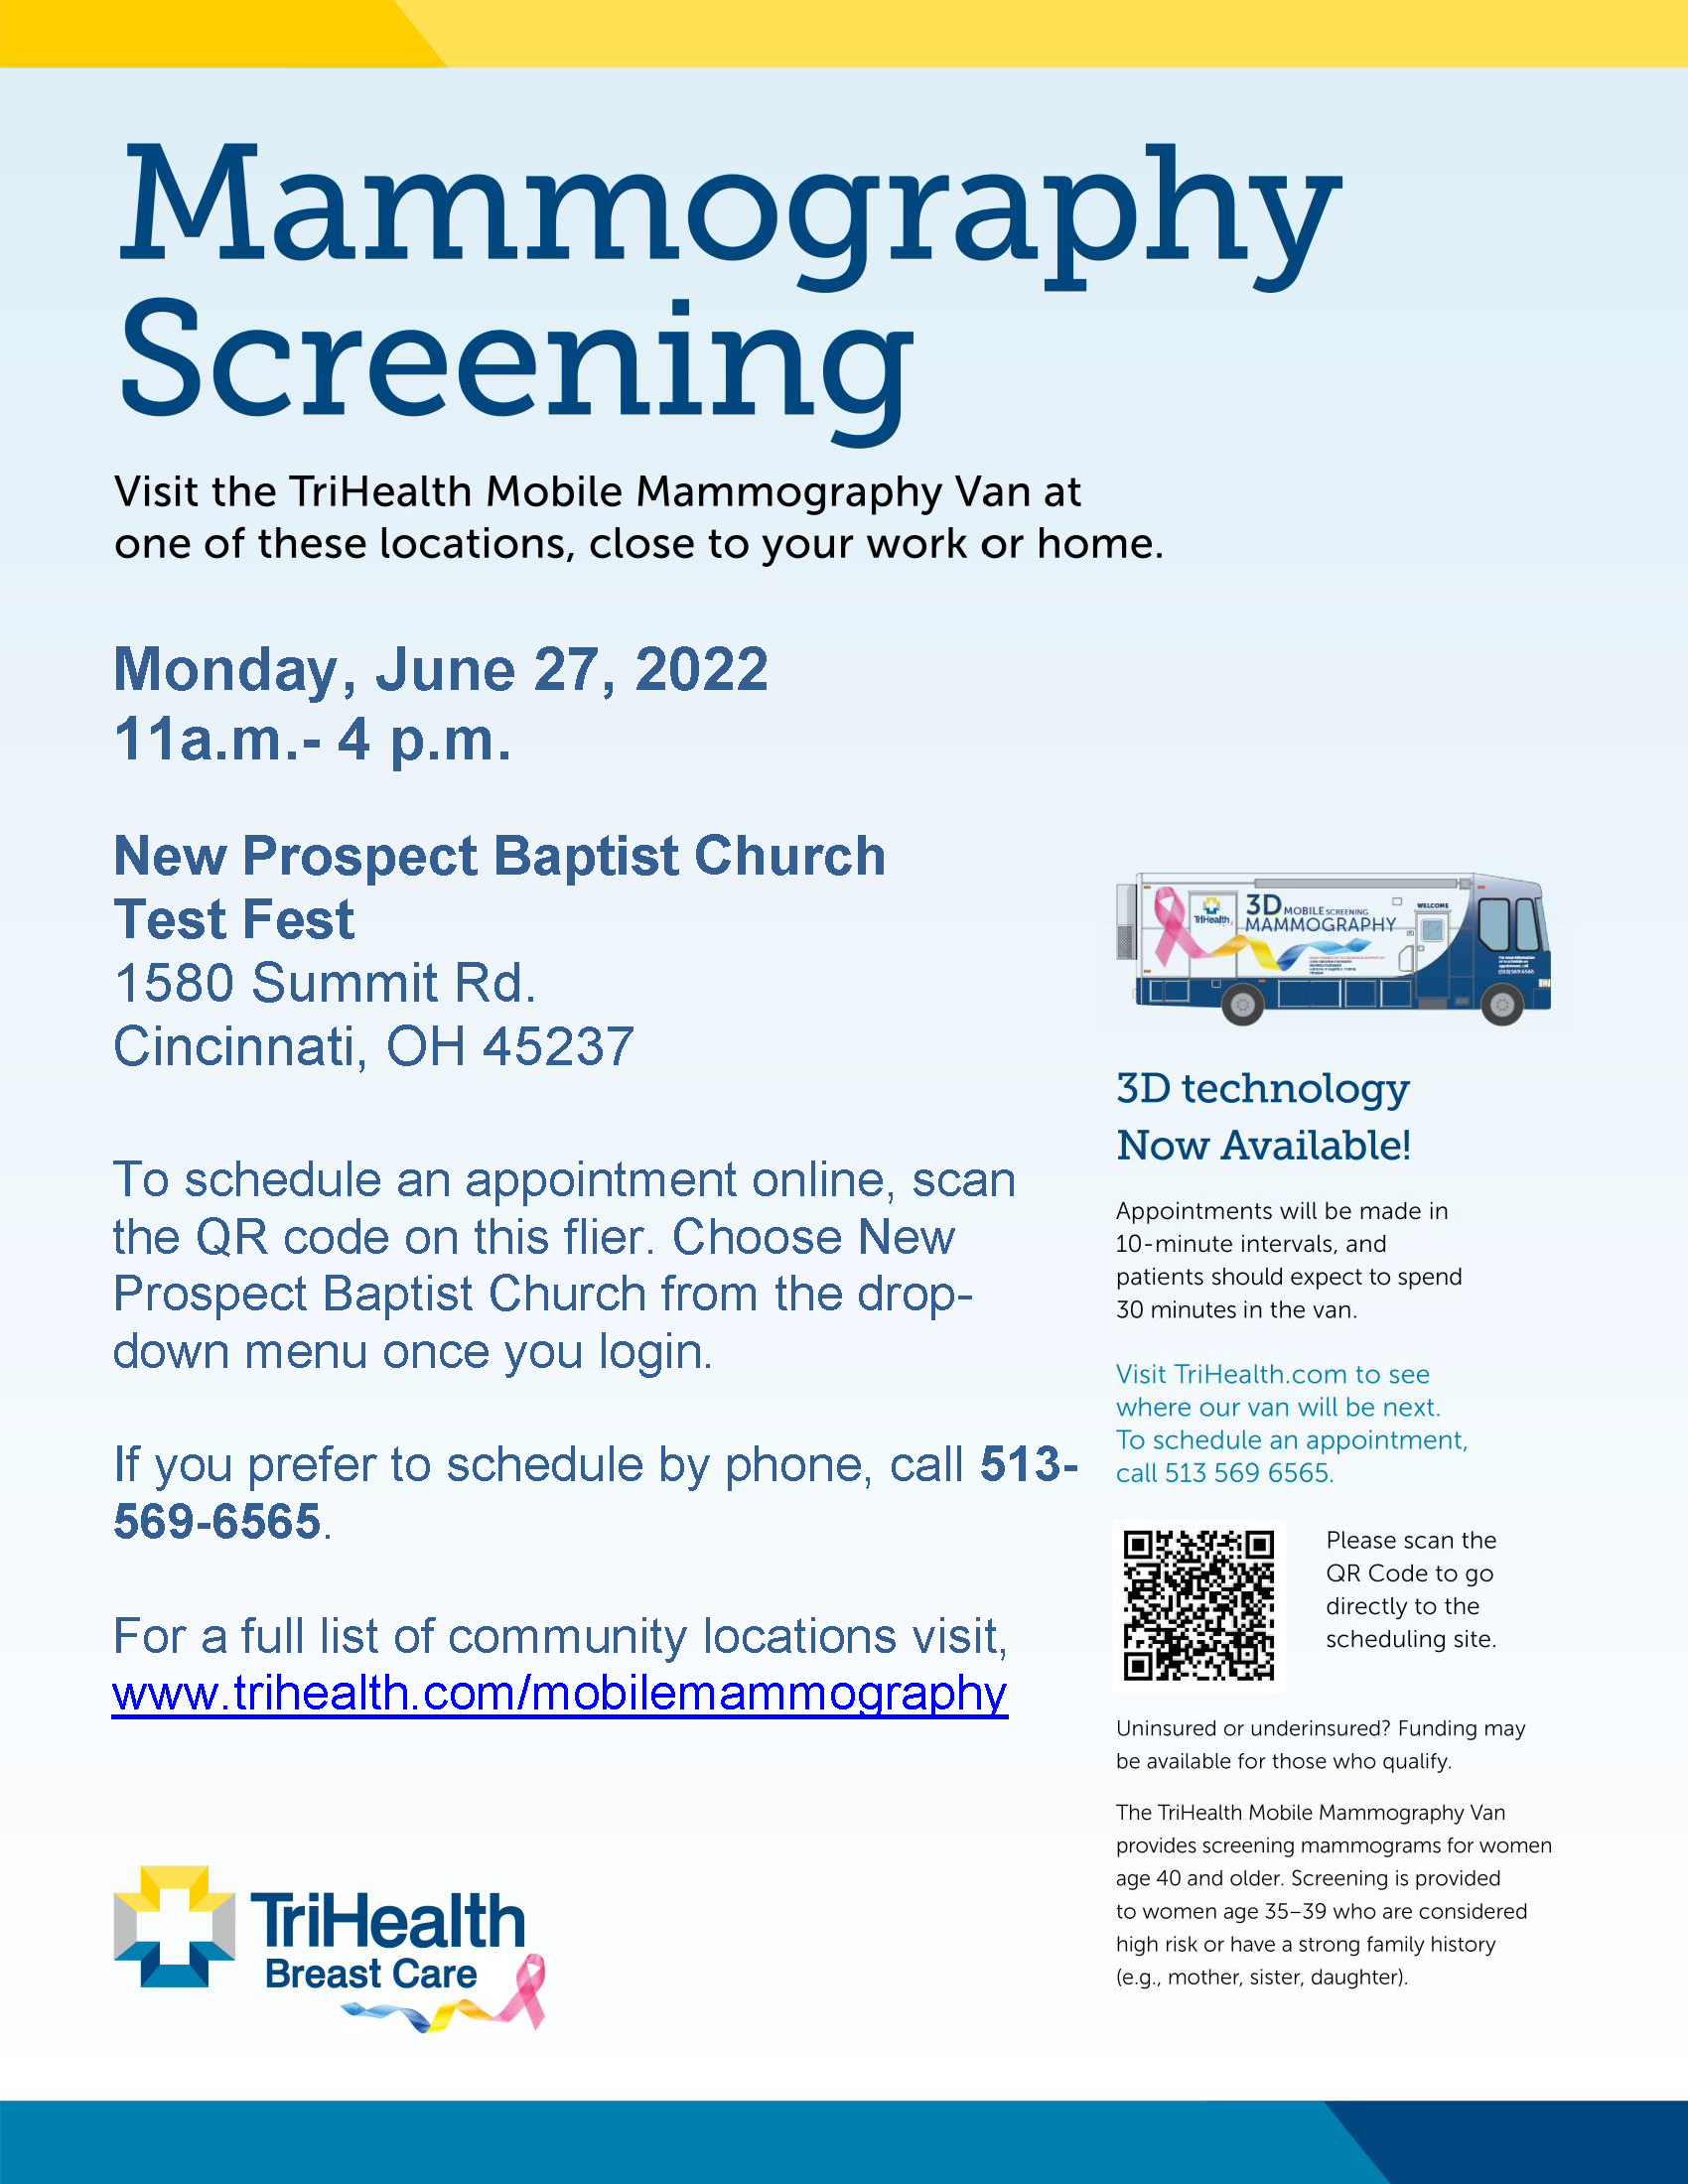 Mammography Screen at 1580 Summit Road Cincinnati, OH 45237 11 a.m. to 4 p.m.